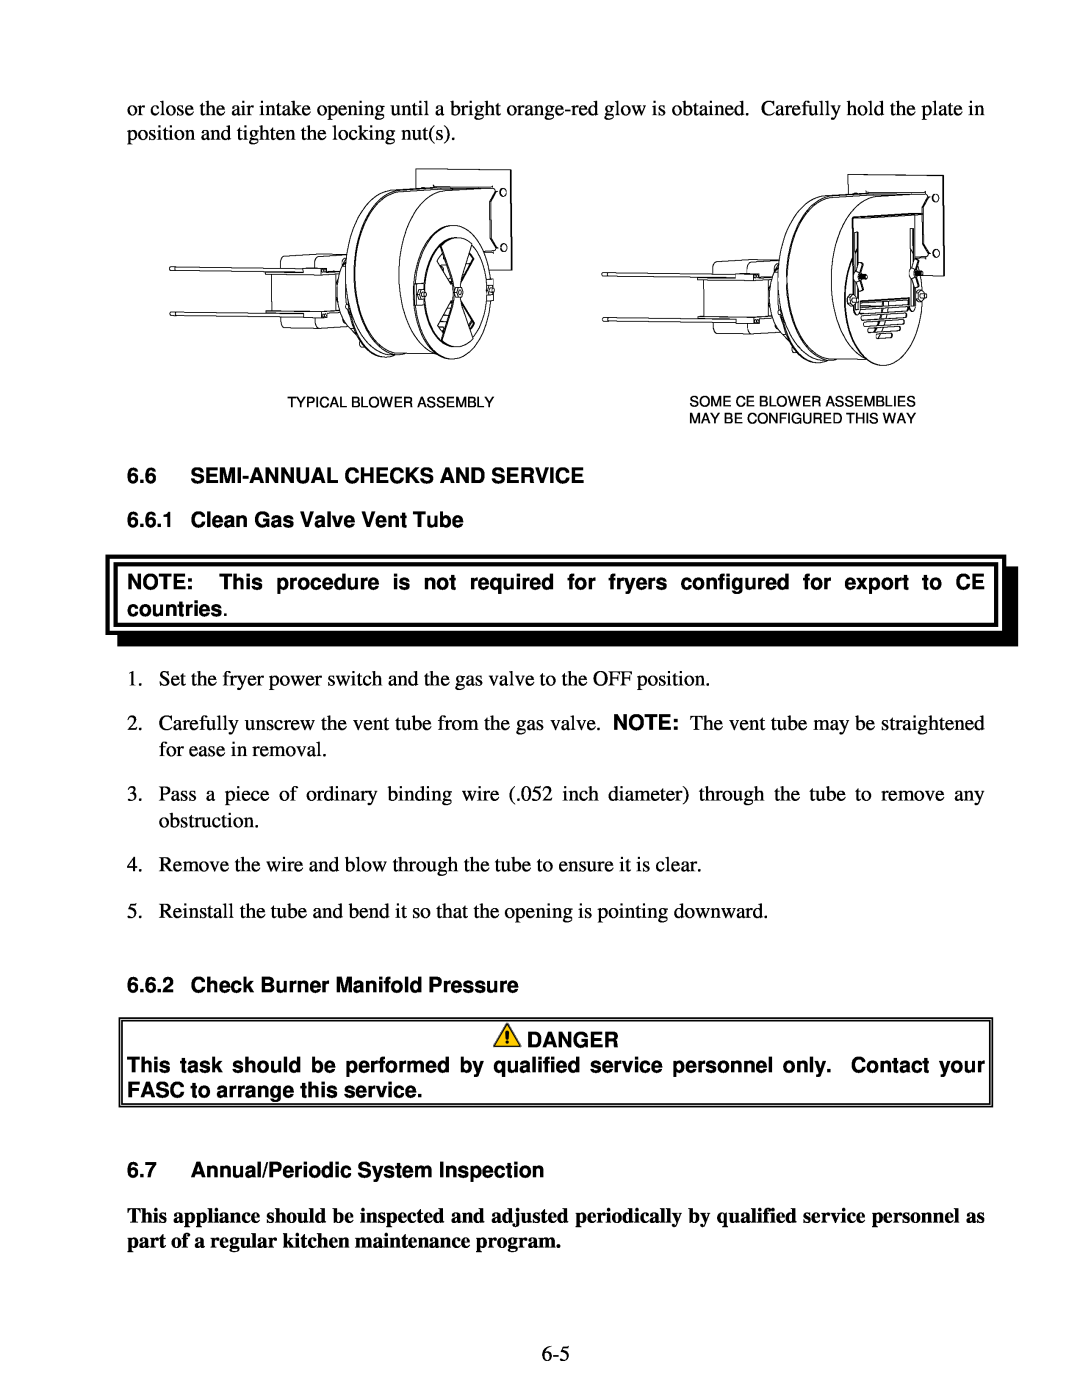 Frymaster Protector Series operation manual Check Burner Manifold Pressure DANGER, 6.7Annual/Periodic System Inspection 